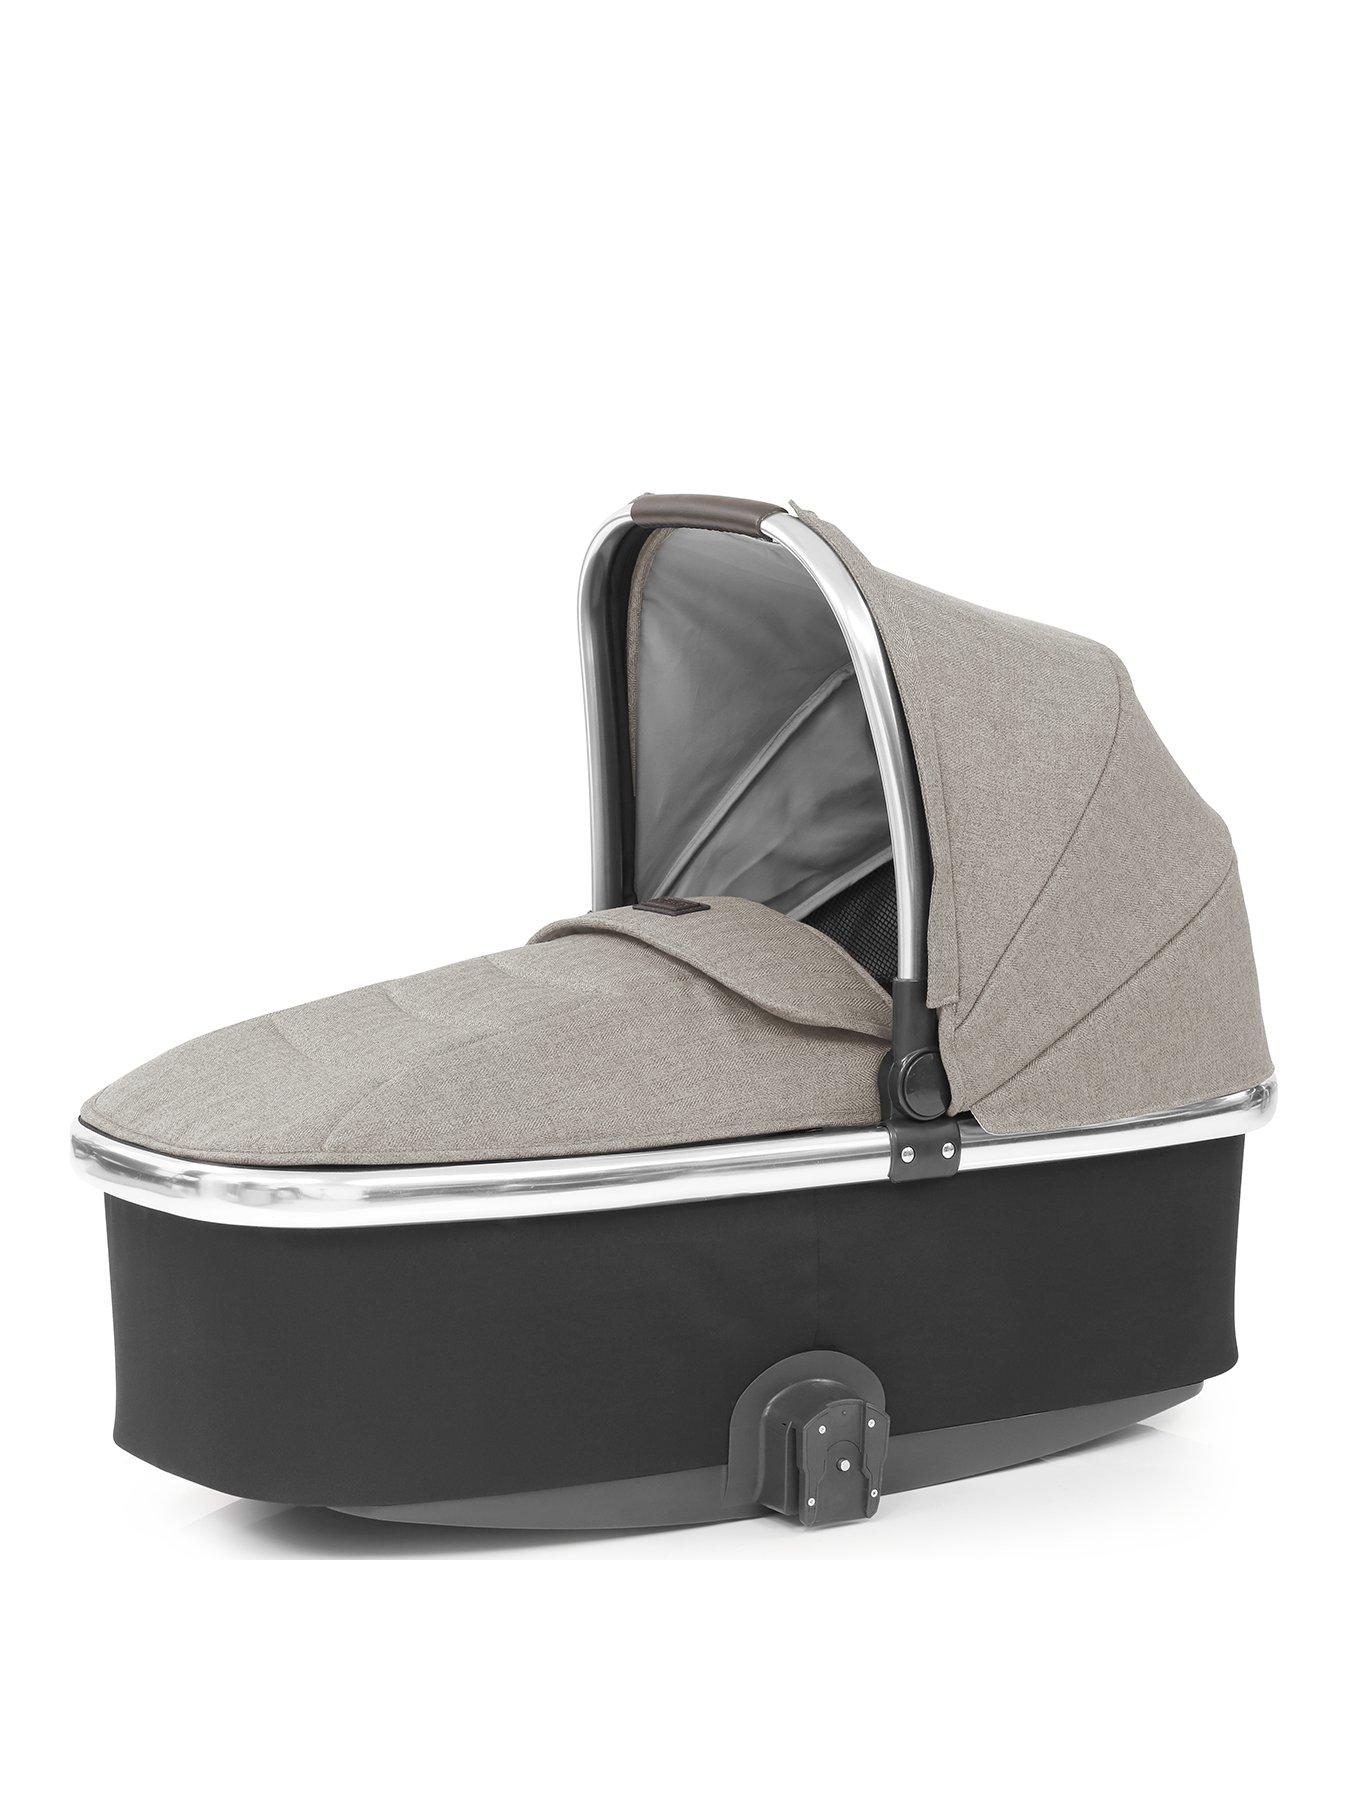 oyster 2 carrycot grey